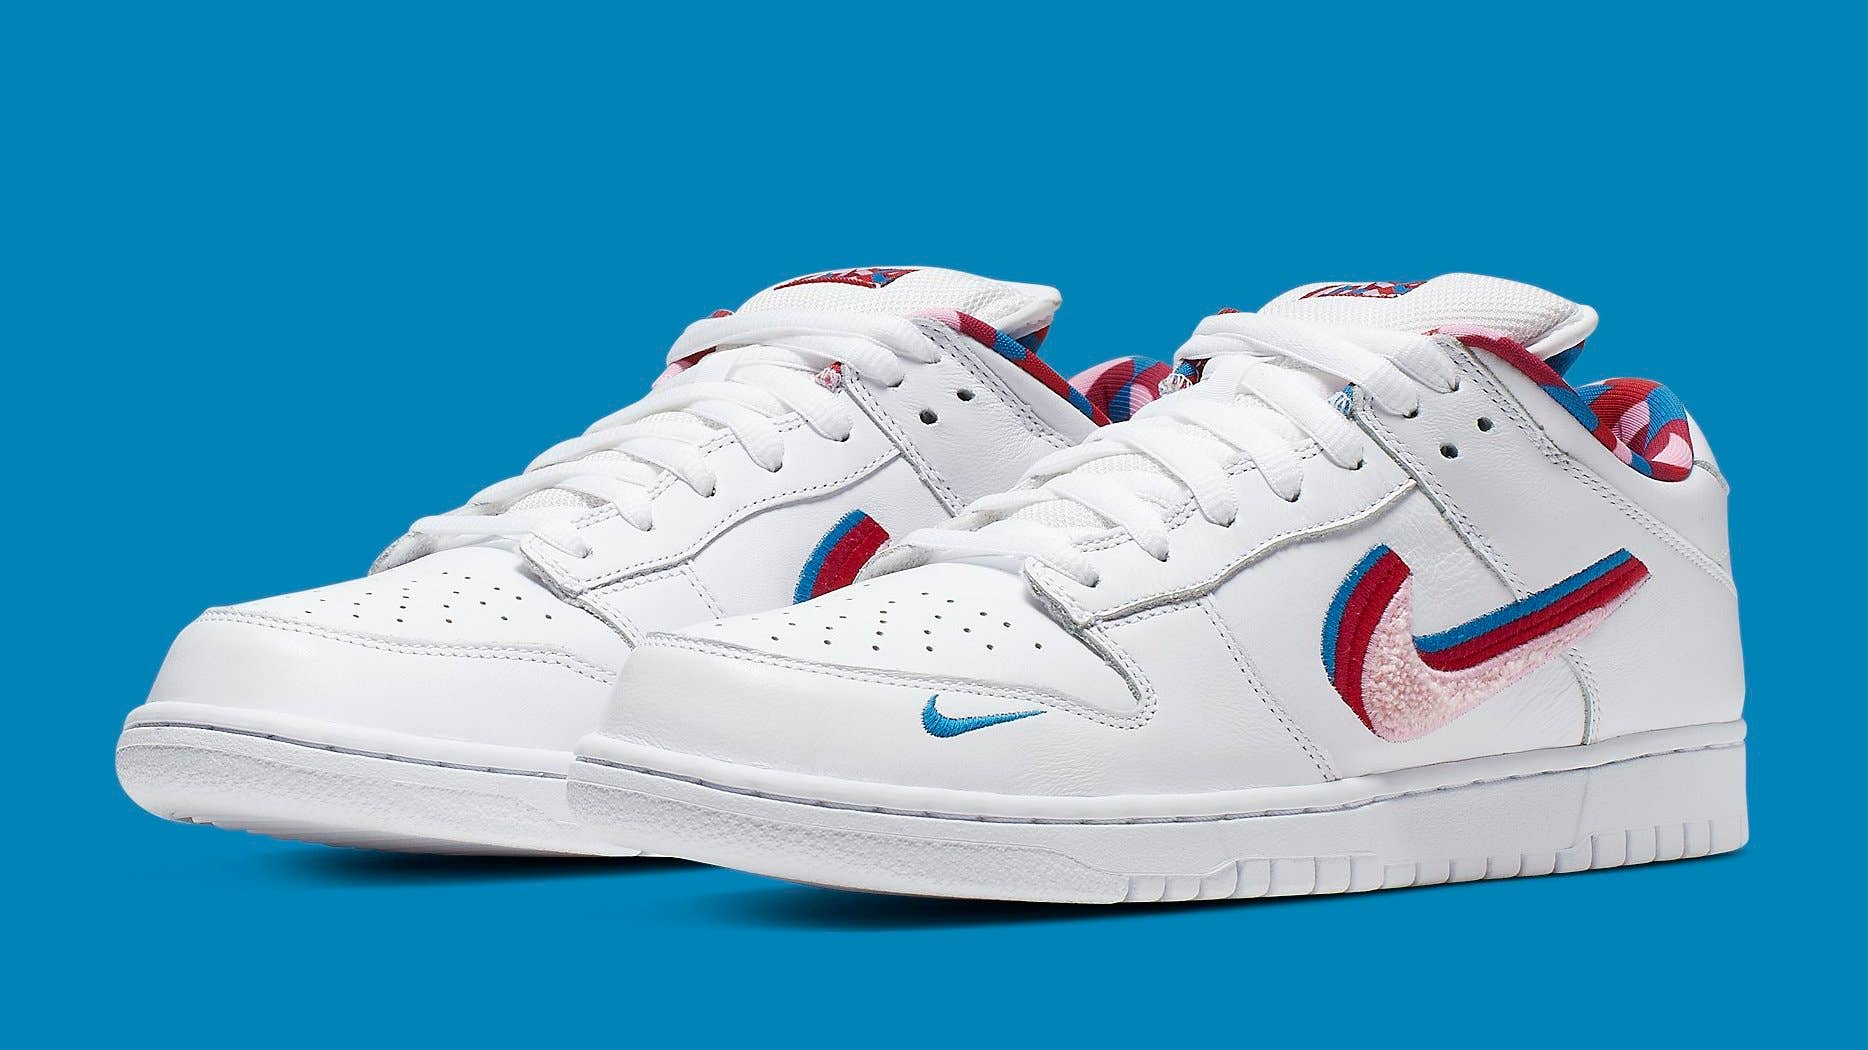 This Skate Shop Fooled Bots for the Parra SB Dunk Release | Complex